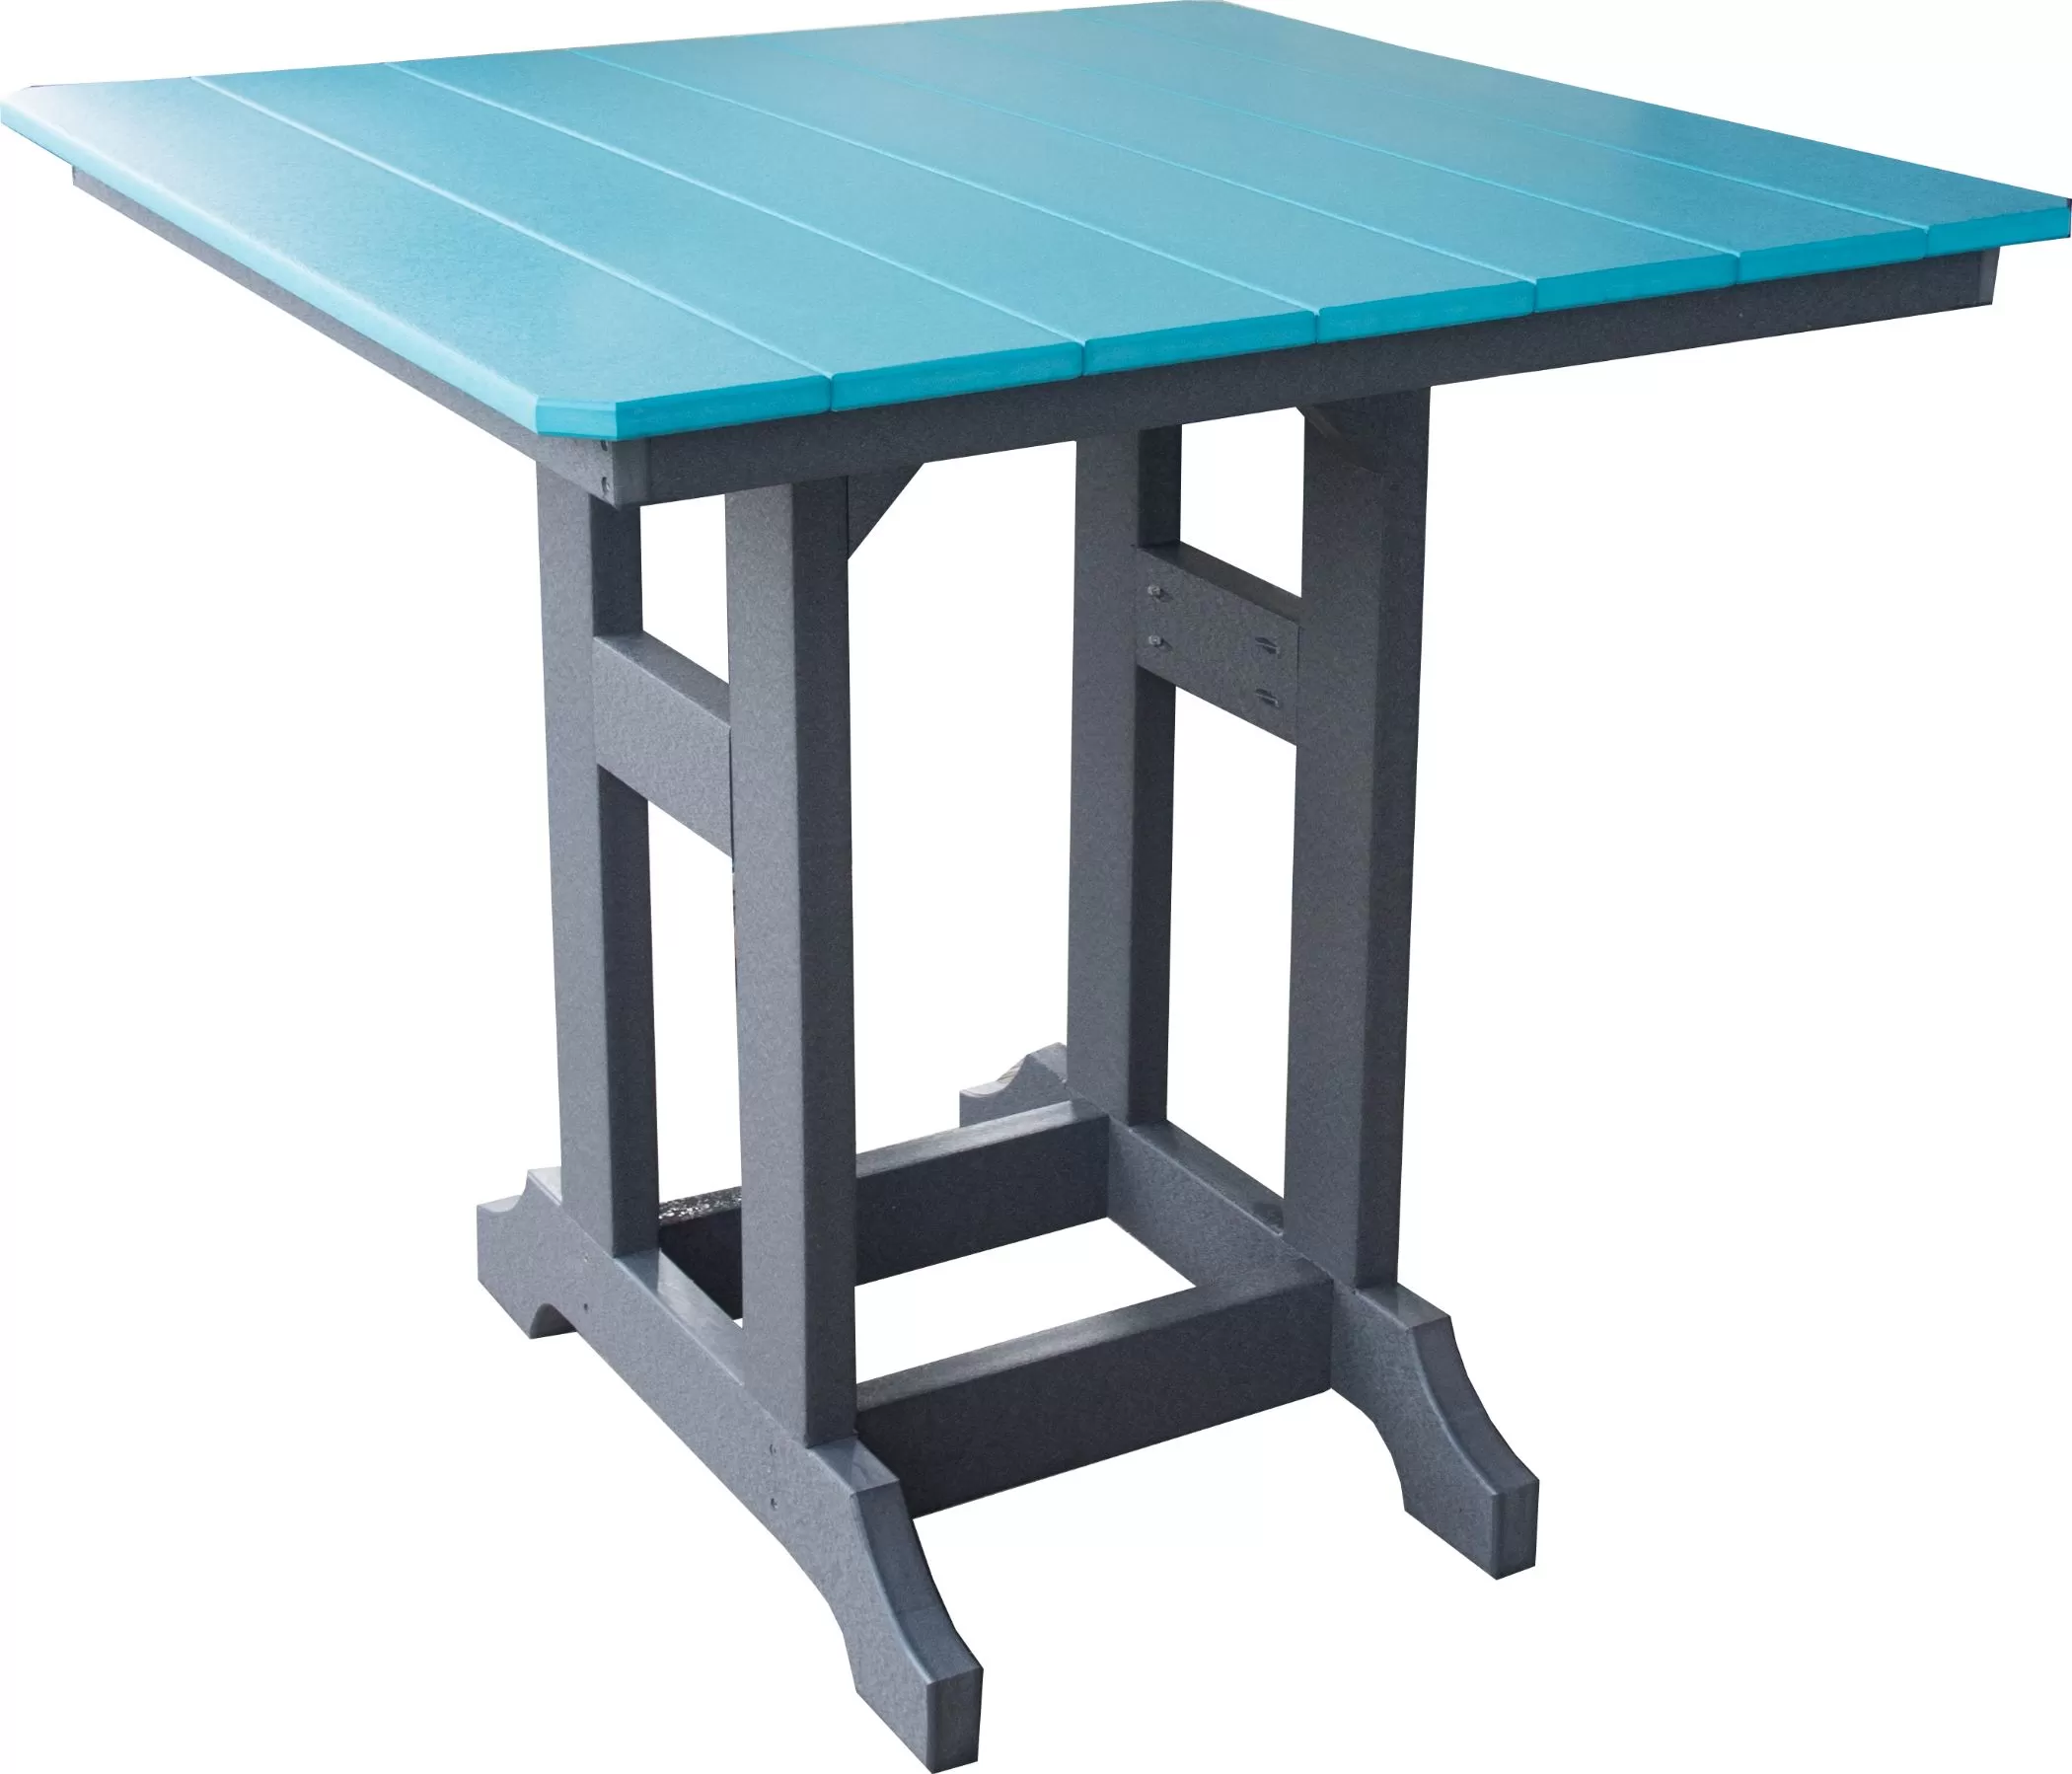 HB 44" Square Counterheight Table